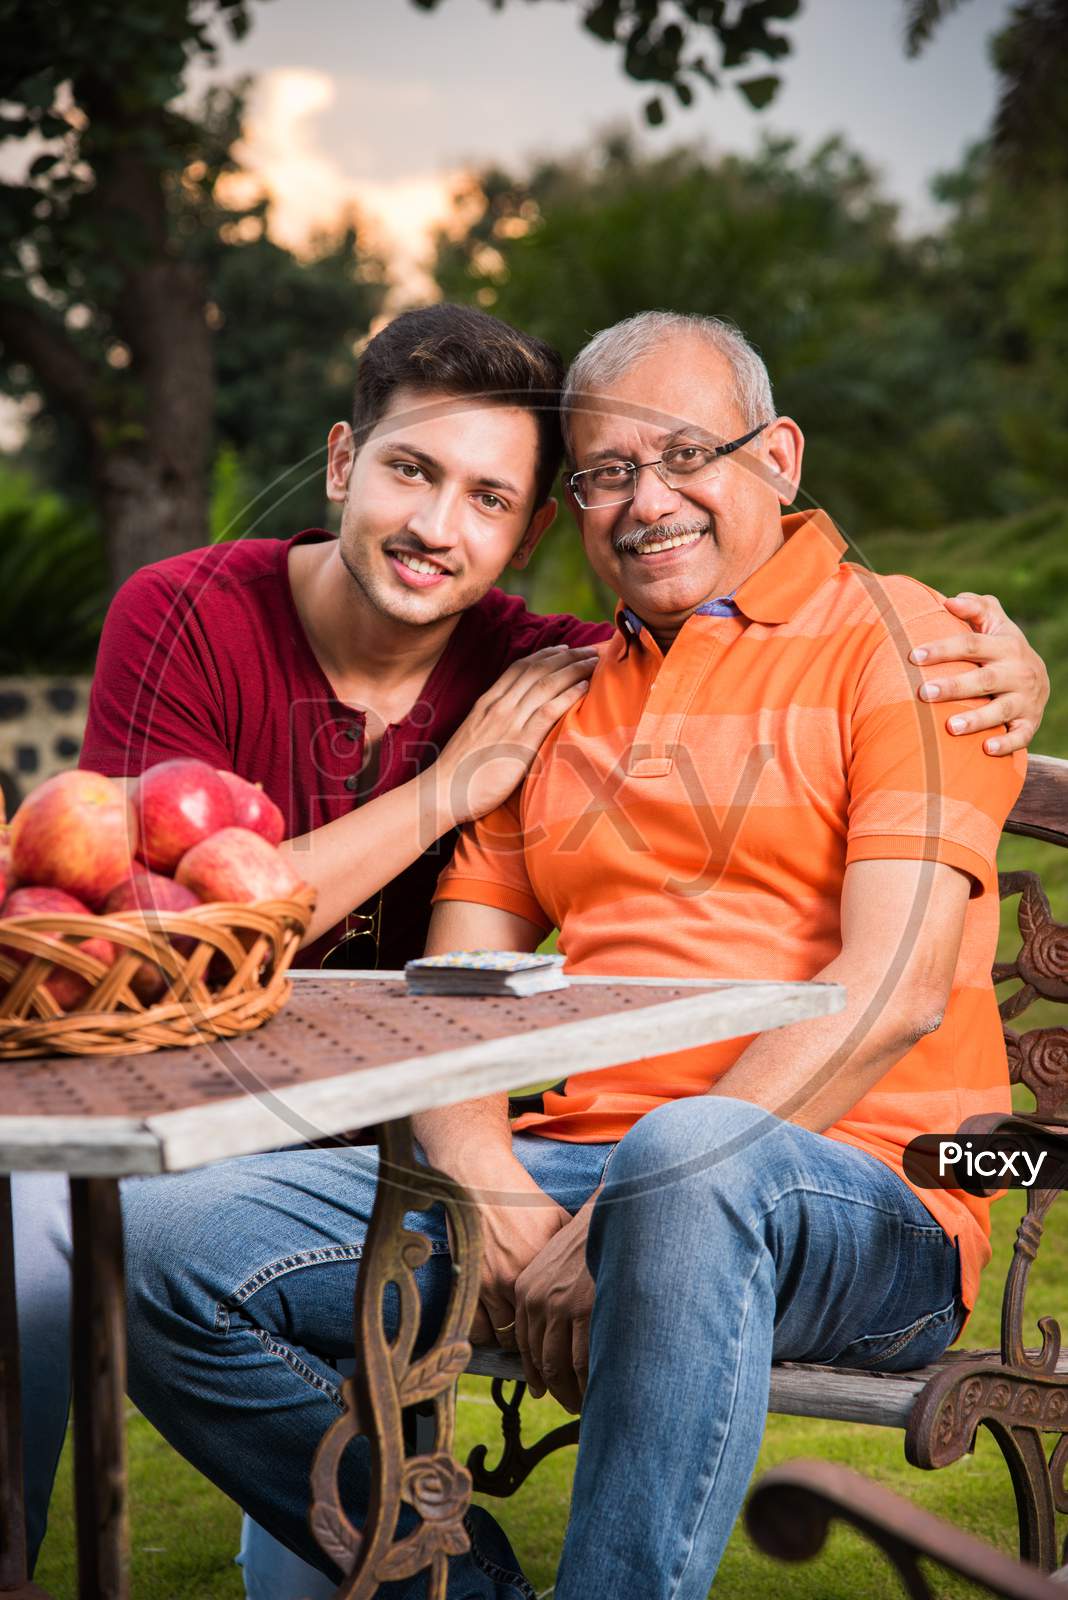 Portrait of Happy Indian/Asian Father and son sitting on lawn chair